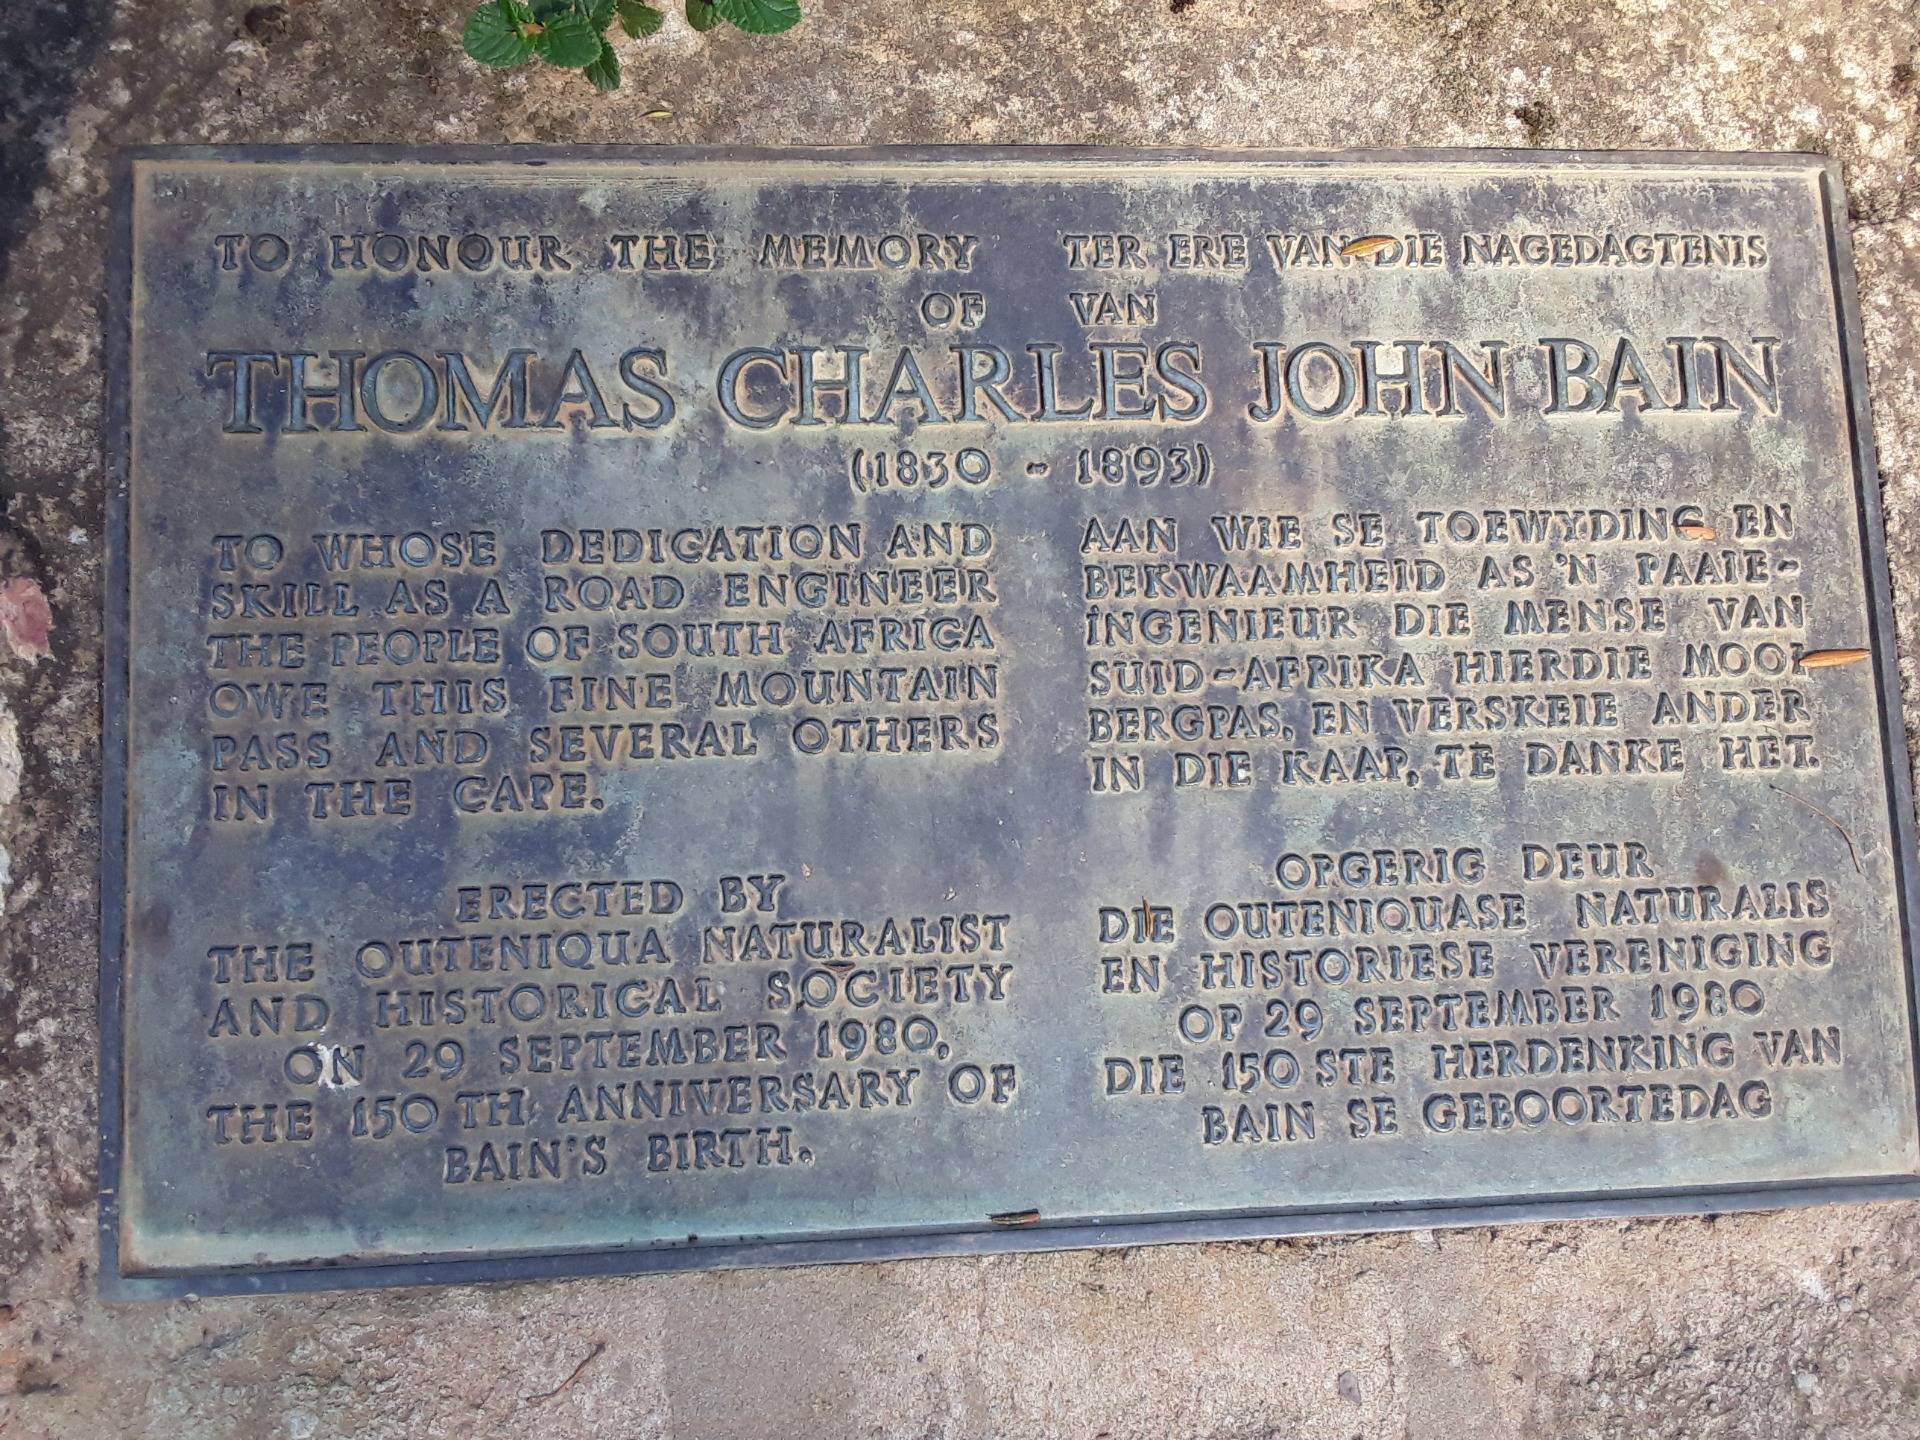 A plaque commemorating the road engineer